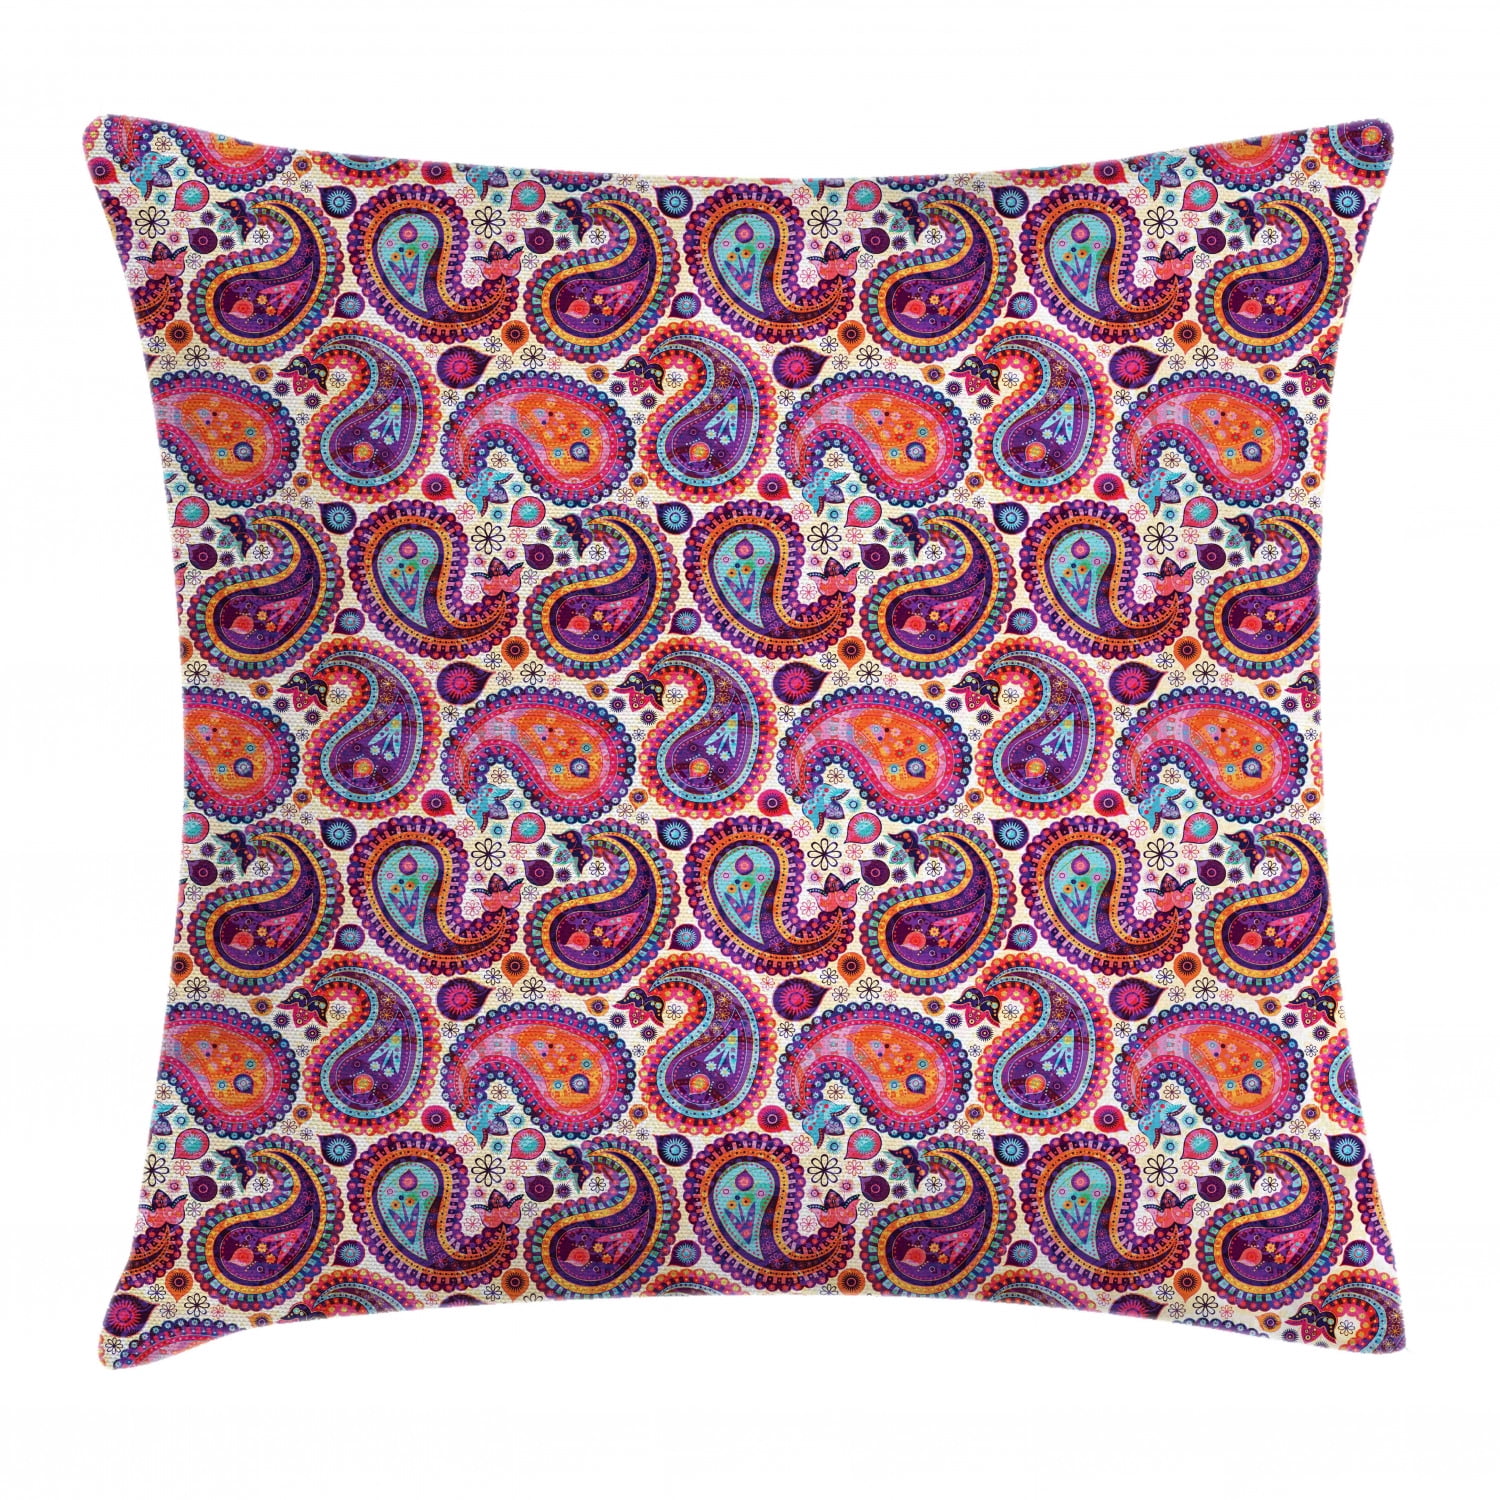 Paisley Throw Pillow Cushion Cover, Persian Ethnic Motifs with Floral ...